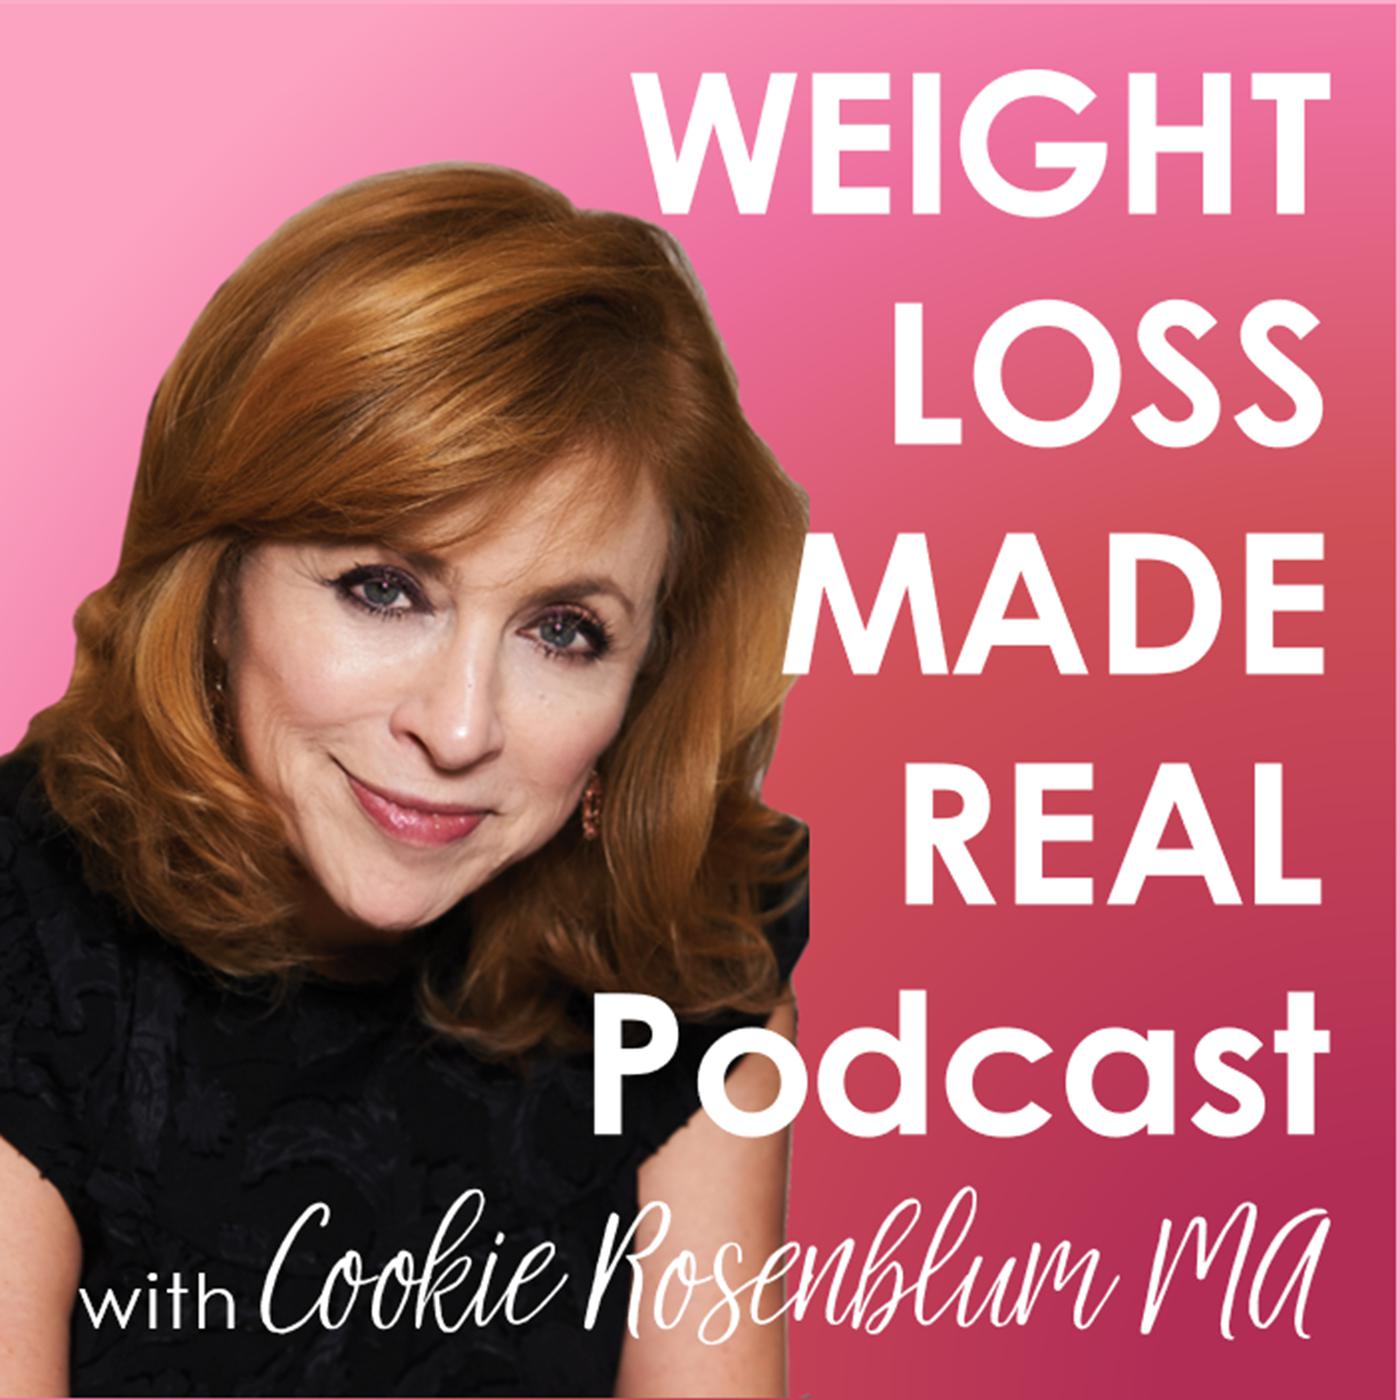 Weight loss made real podcast with cookie rosenbaum md.